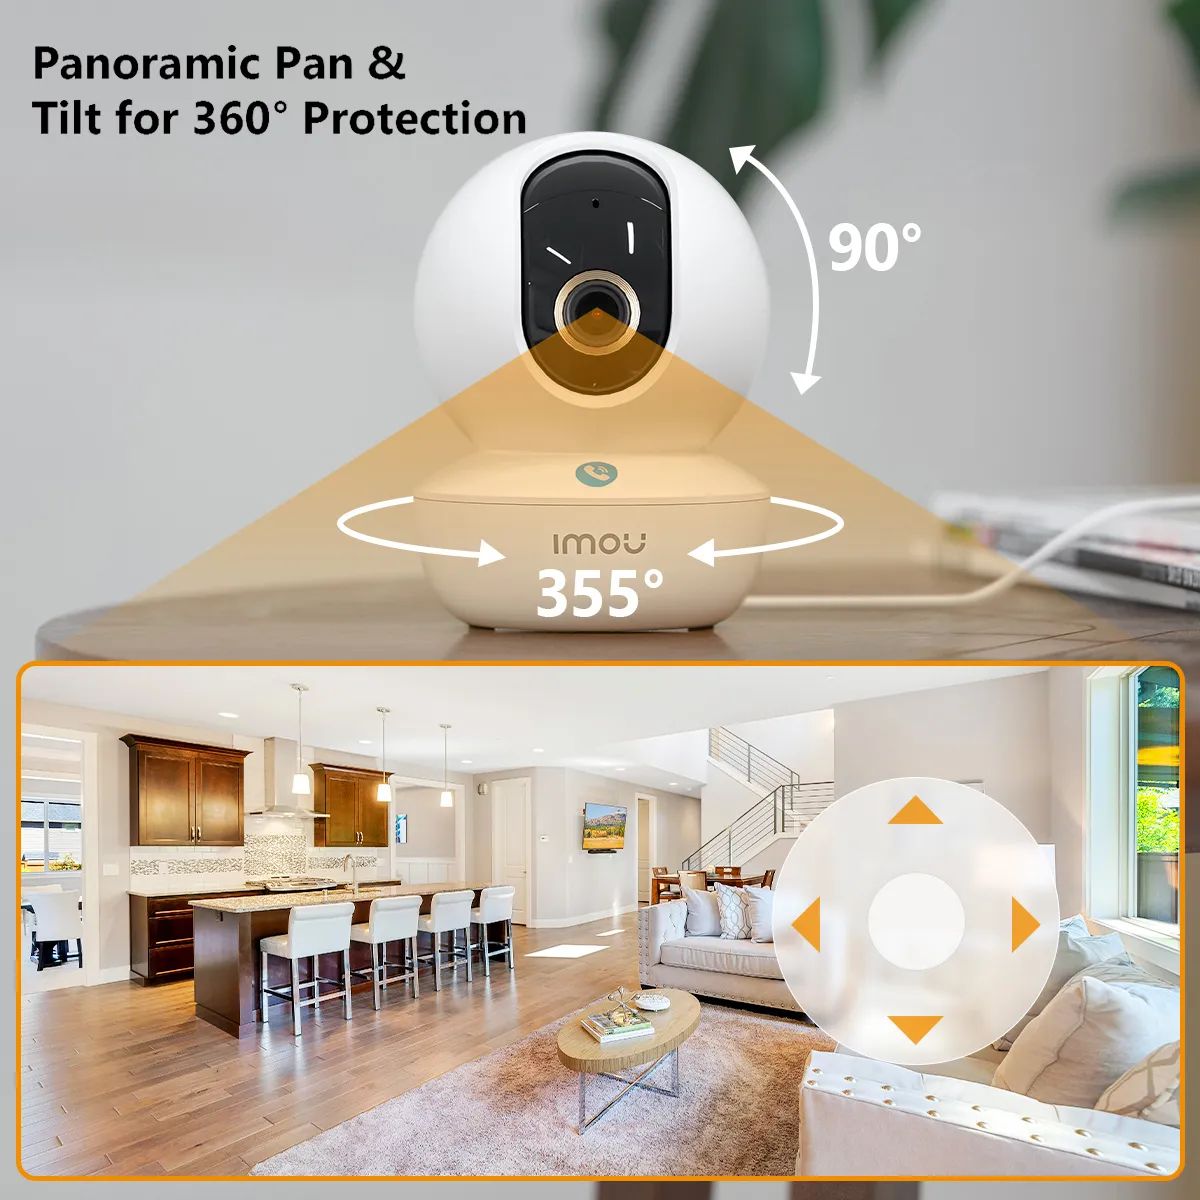  Imou 2K Indoor Security Camera WiFi Camera for Home Security,  Surveillance Camera 4MP w/Night Vision, 360° View with AI Human Detection,  2-Way Audio, Smart Tracking, Siren, Works with Alexa 2.4GHz 